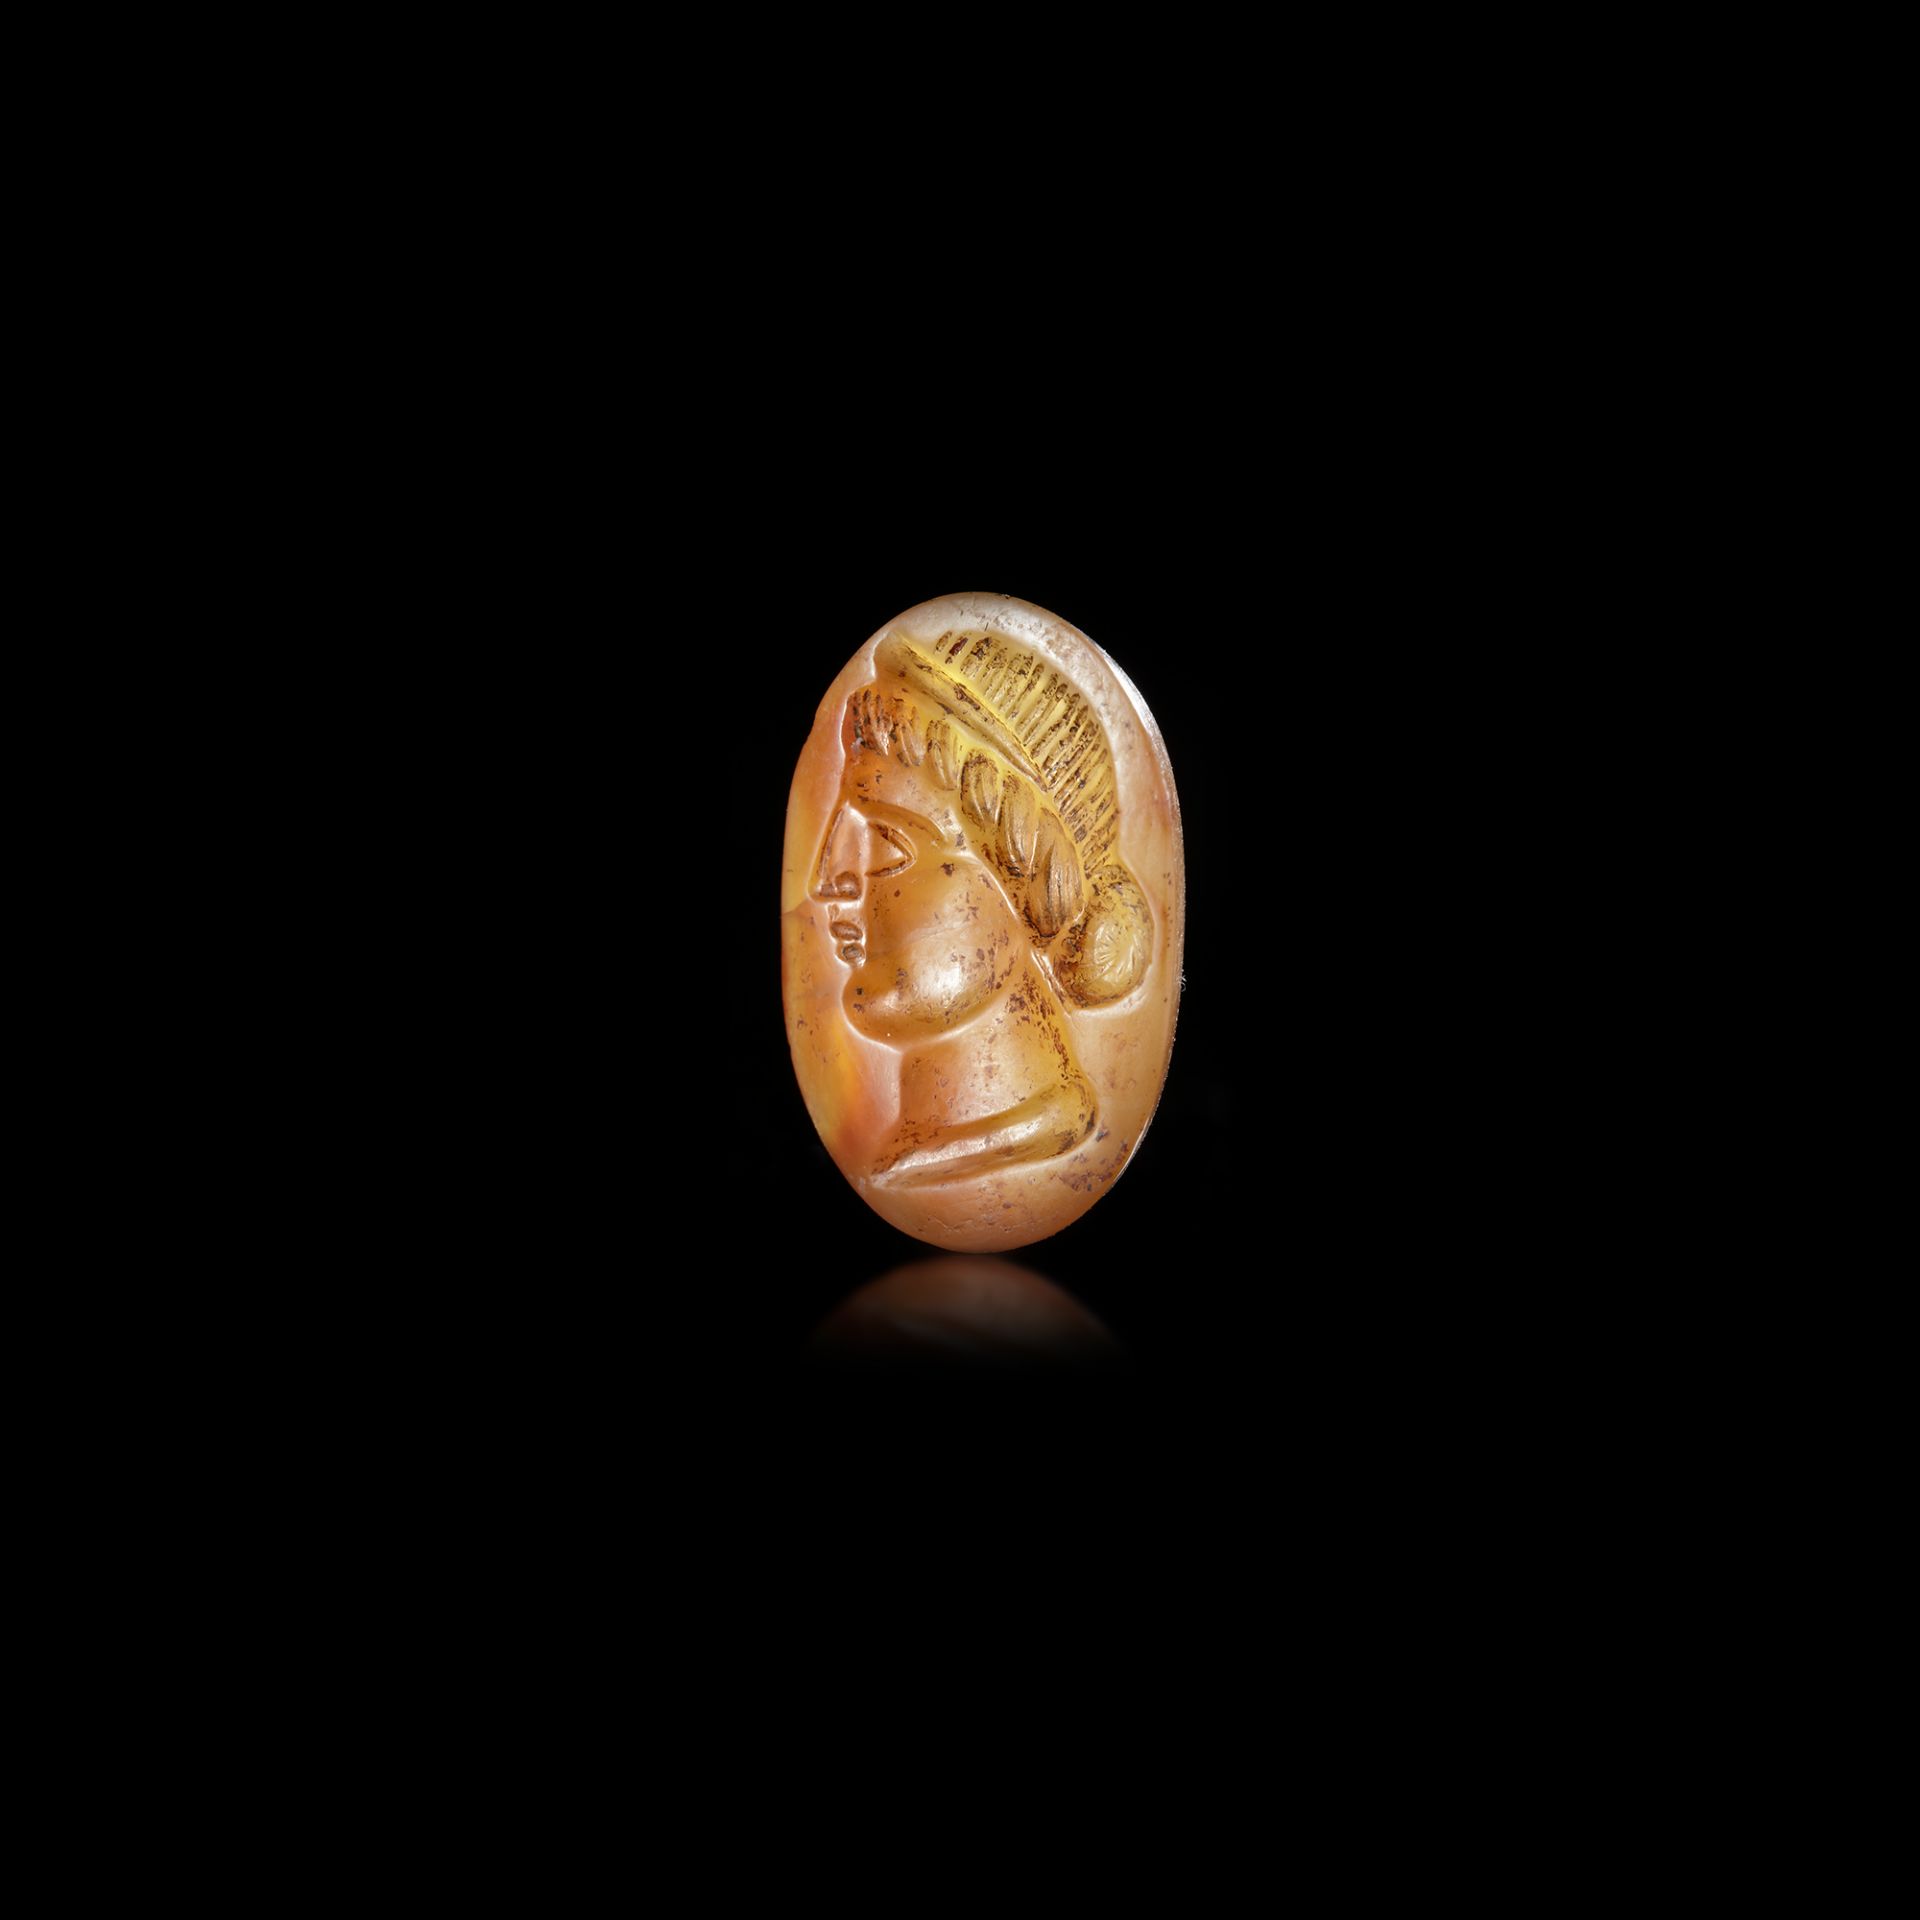 A CARNELIAN INTAGLIO IN THE ROMAN STYLE WITH A HEAD OF A WOMAN LEFT, 2ND CENTURY AD OR LATER